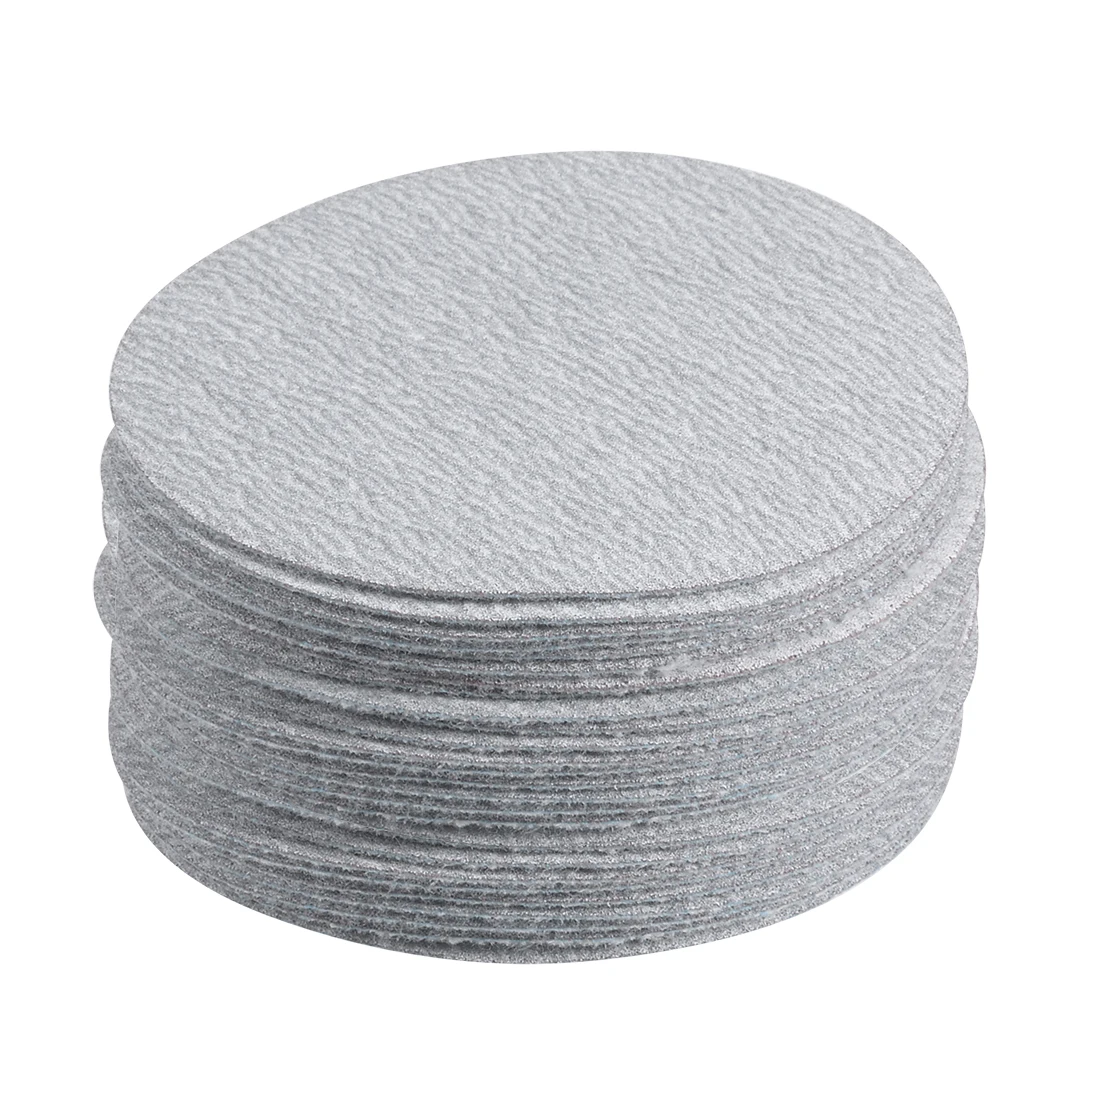 

uxcell 30 Pcs 3-Inch Aluminum Oxide White Dry Hook and Loop Sanding Discs Flocking Sandpaper 240 Grit